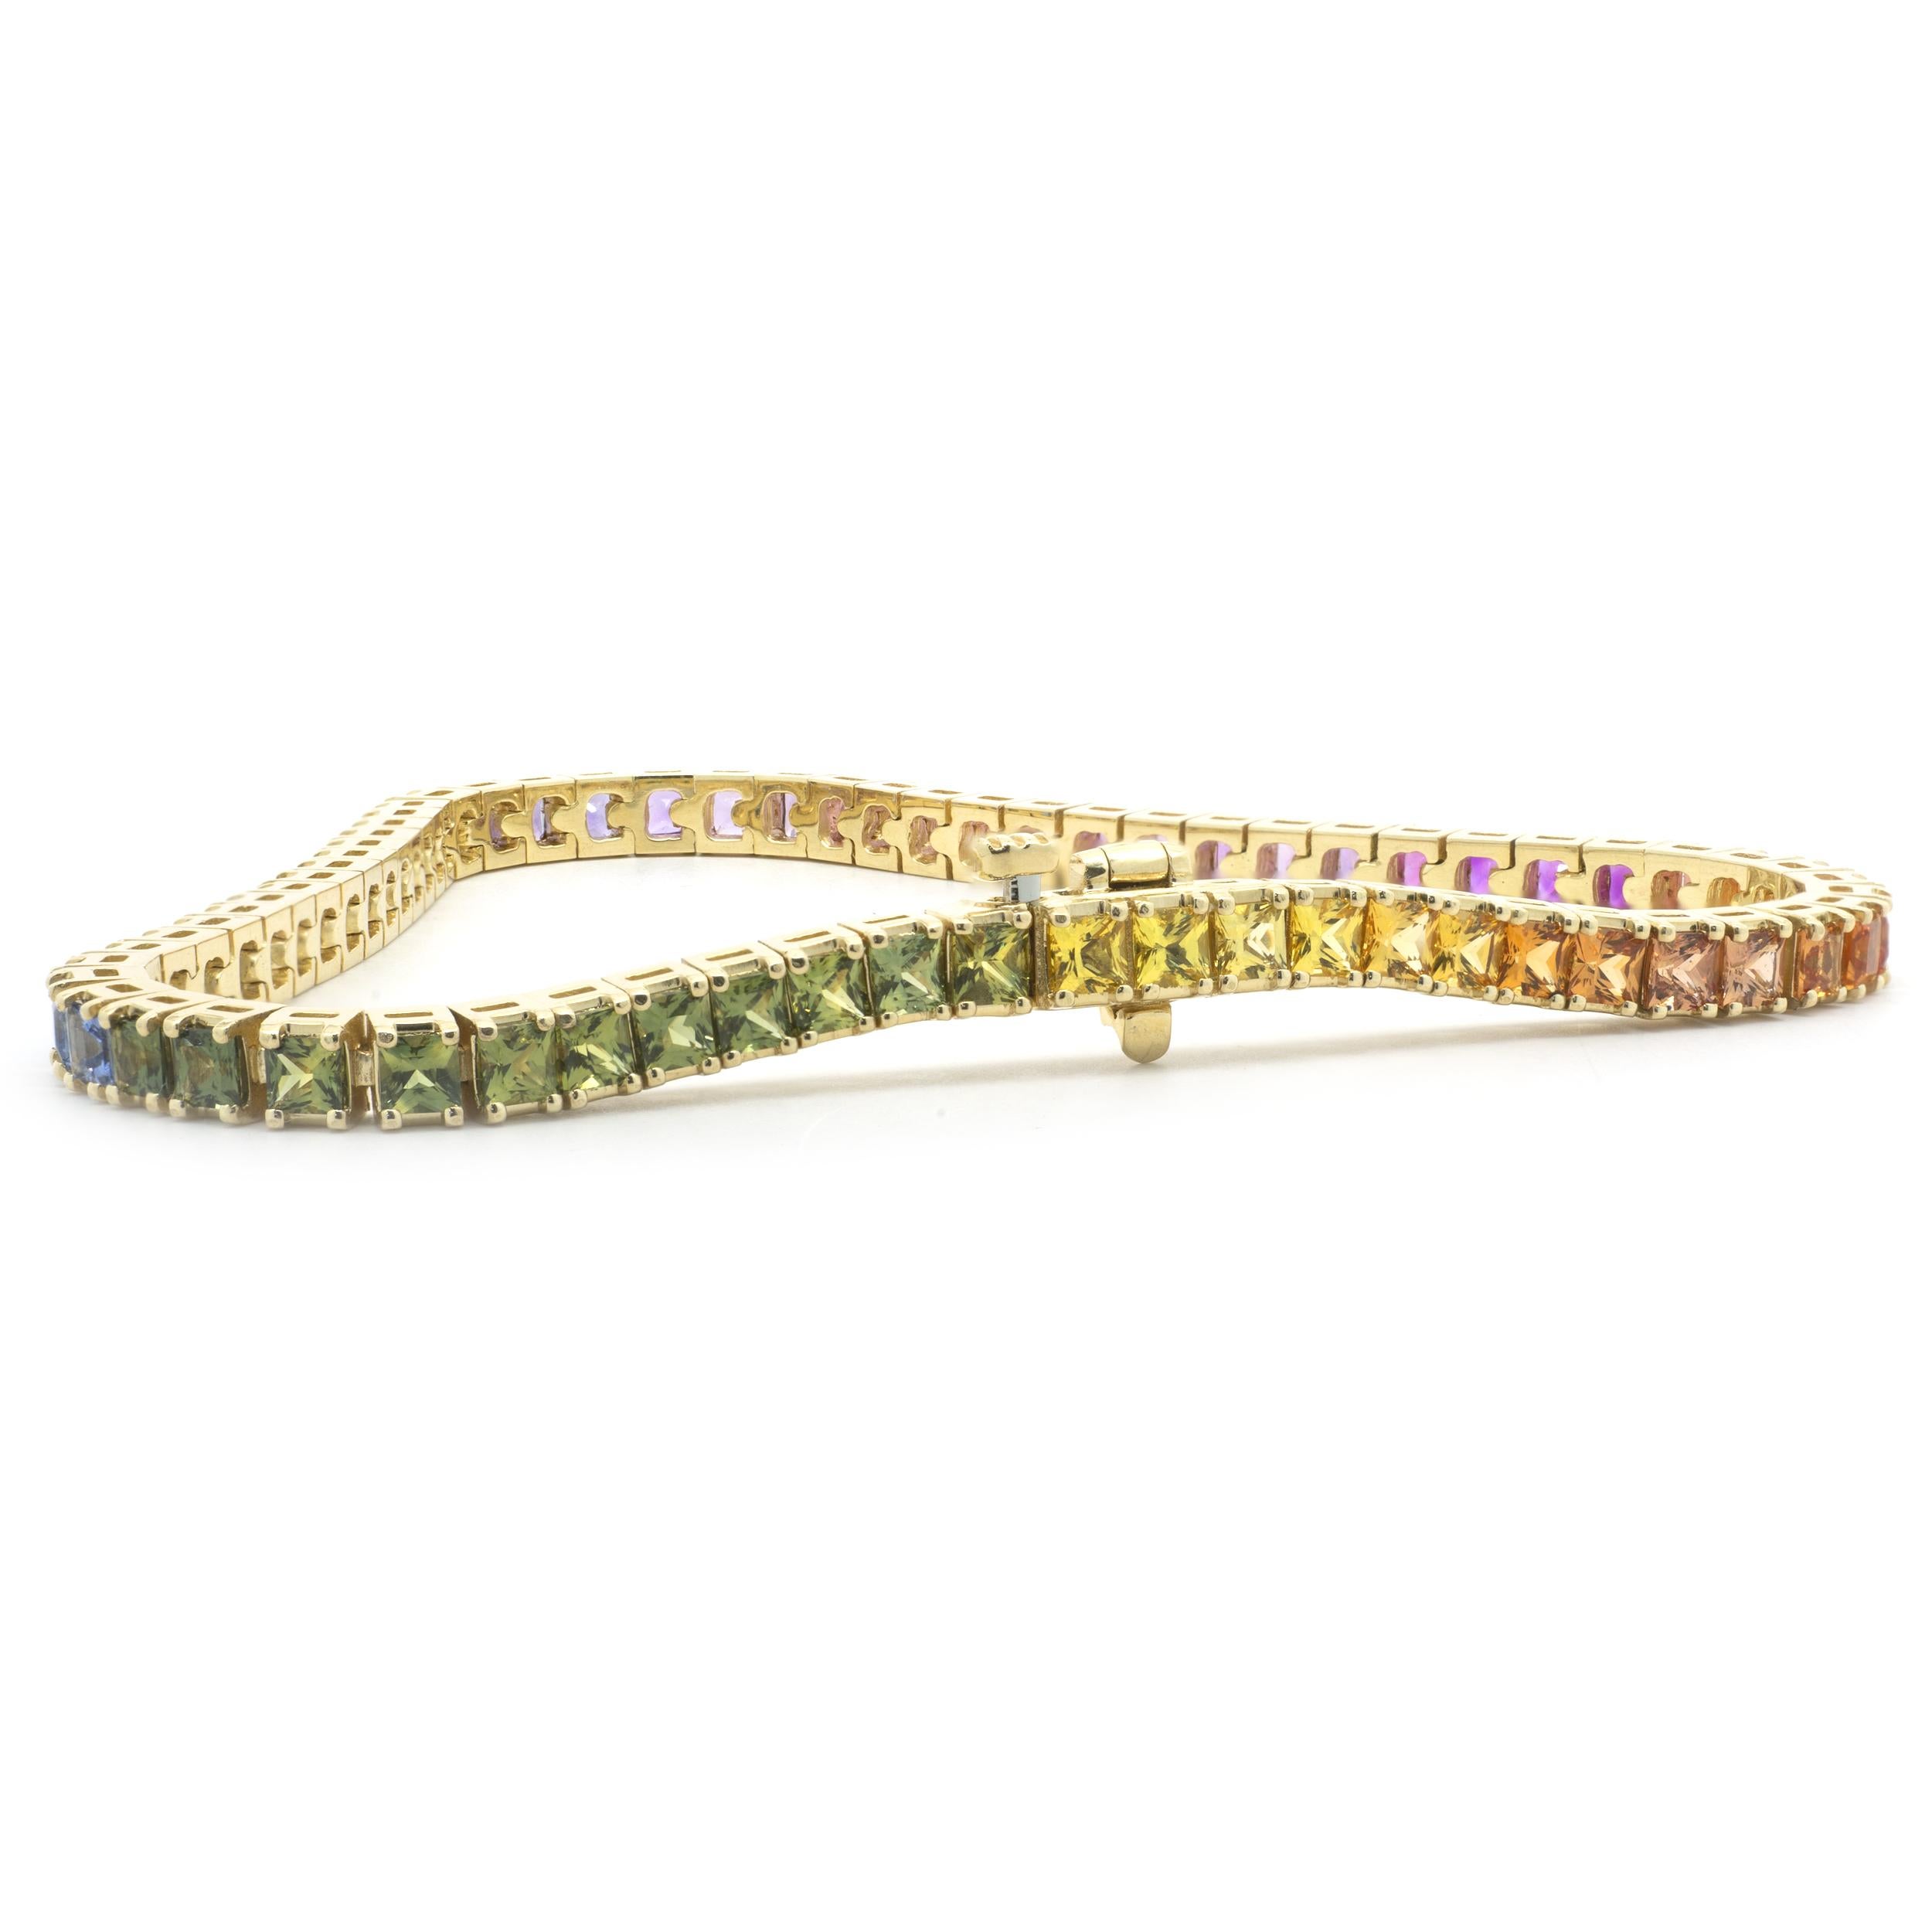 Designer: custom
Material: 14K yellow gold
Sapphire: 56 princess cut = 10.56cttw
Color: Rainbow
Clarity: AAA
Dimensions: bracelet will fit up to a 7-inch wrist
Weight: 14.03 grams
